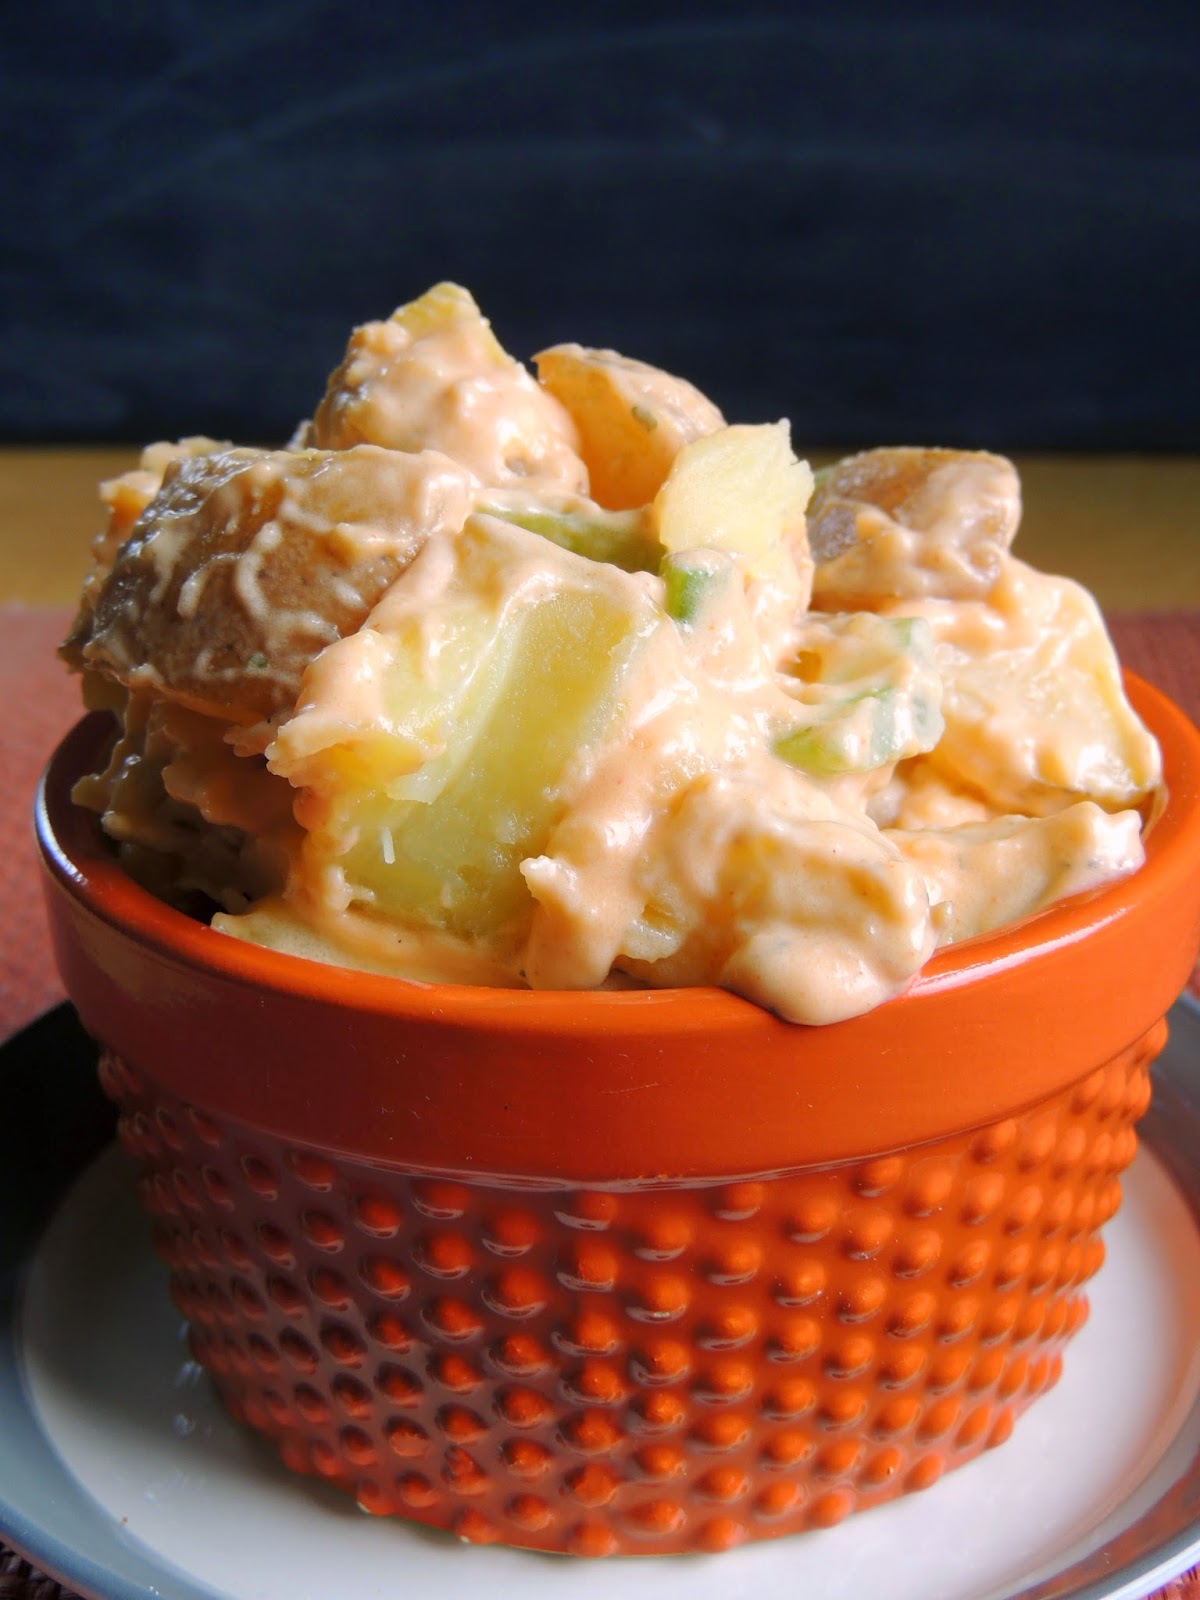 Traditional potato salad gets a game day makeover in this Creamy Buffalo Ranch Potato Salad.